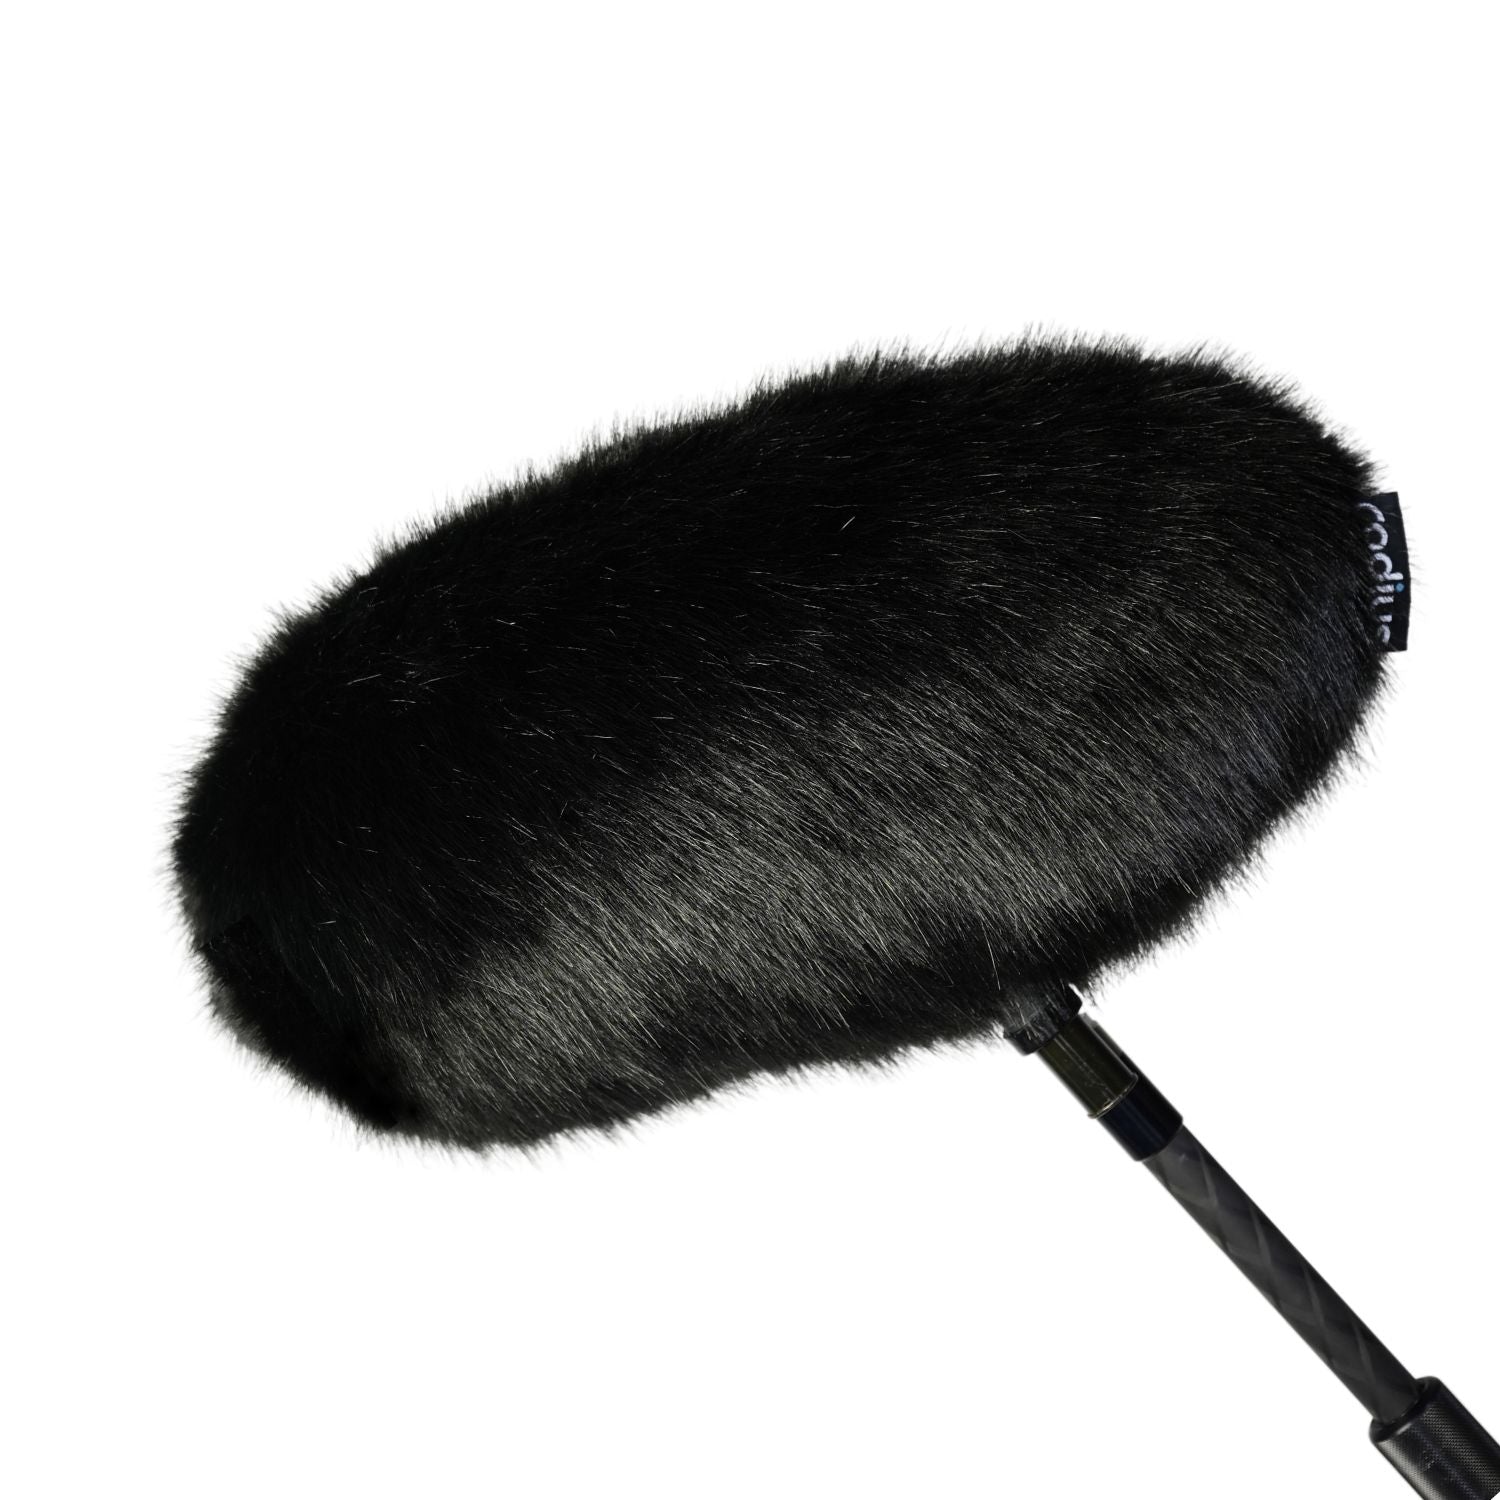 Replacement Windcover for Cinela Pianissimo, Black Fur